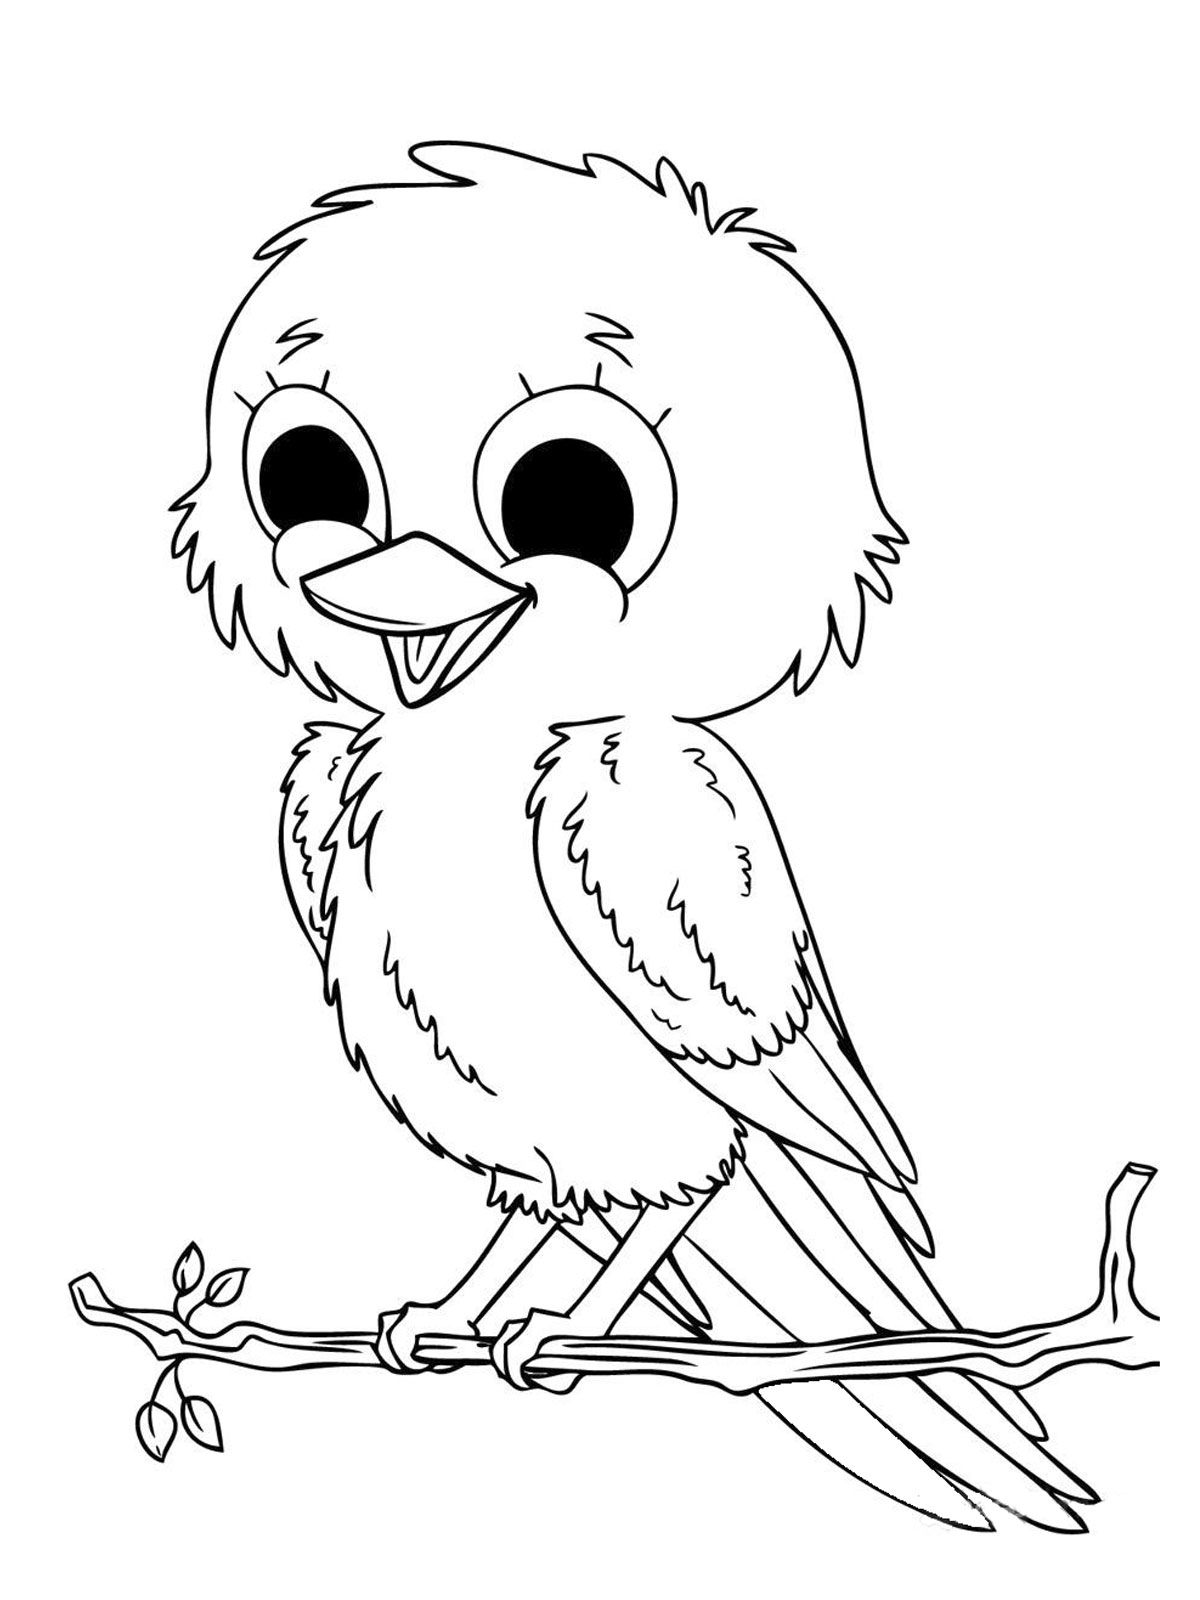 Coloring Pages Cute Animals | Coloring